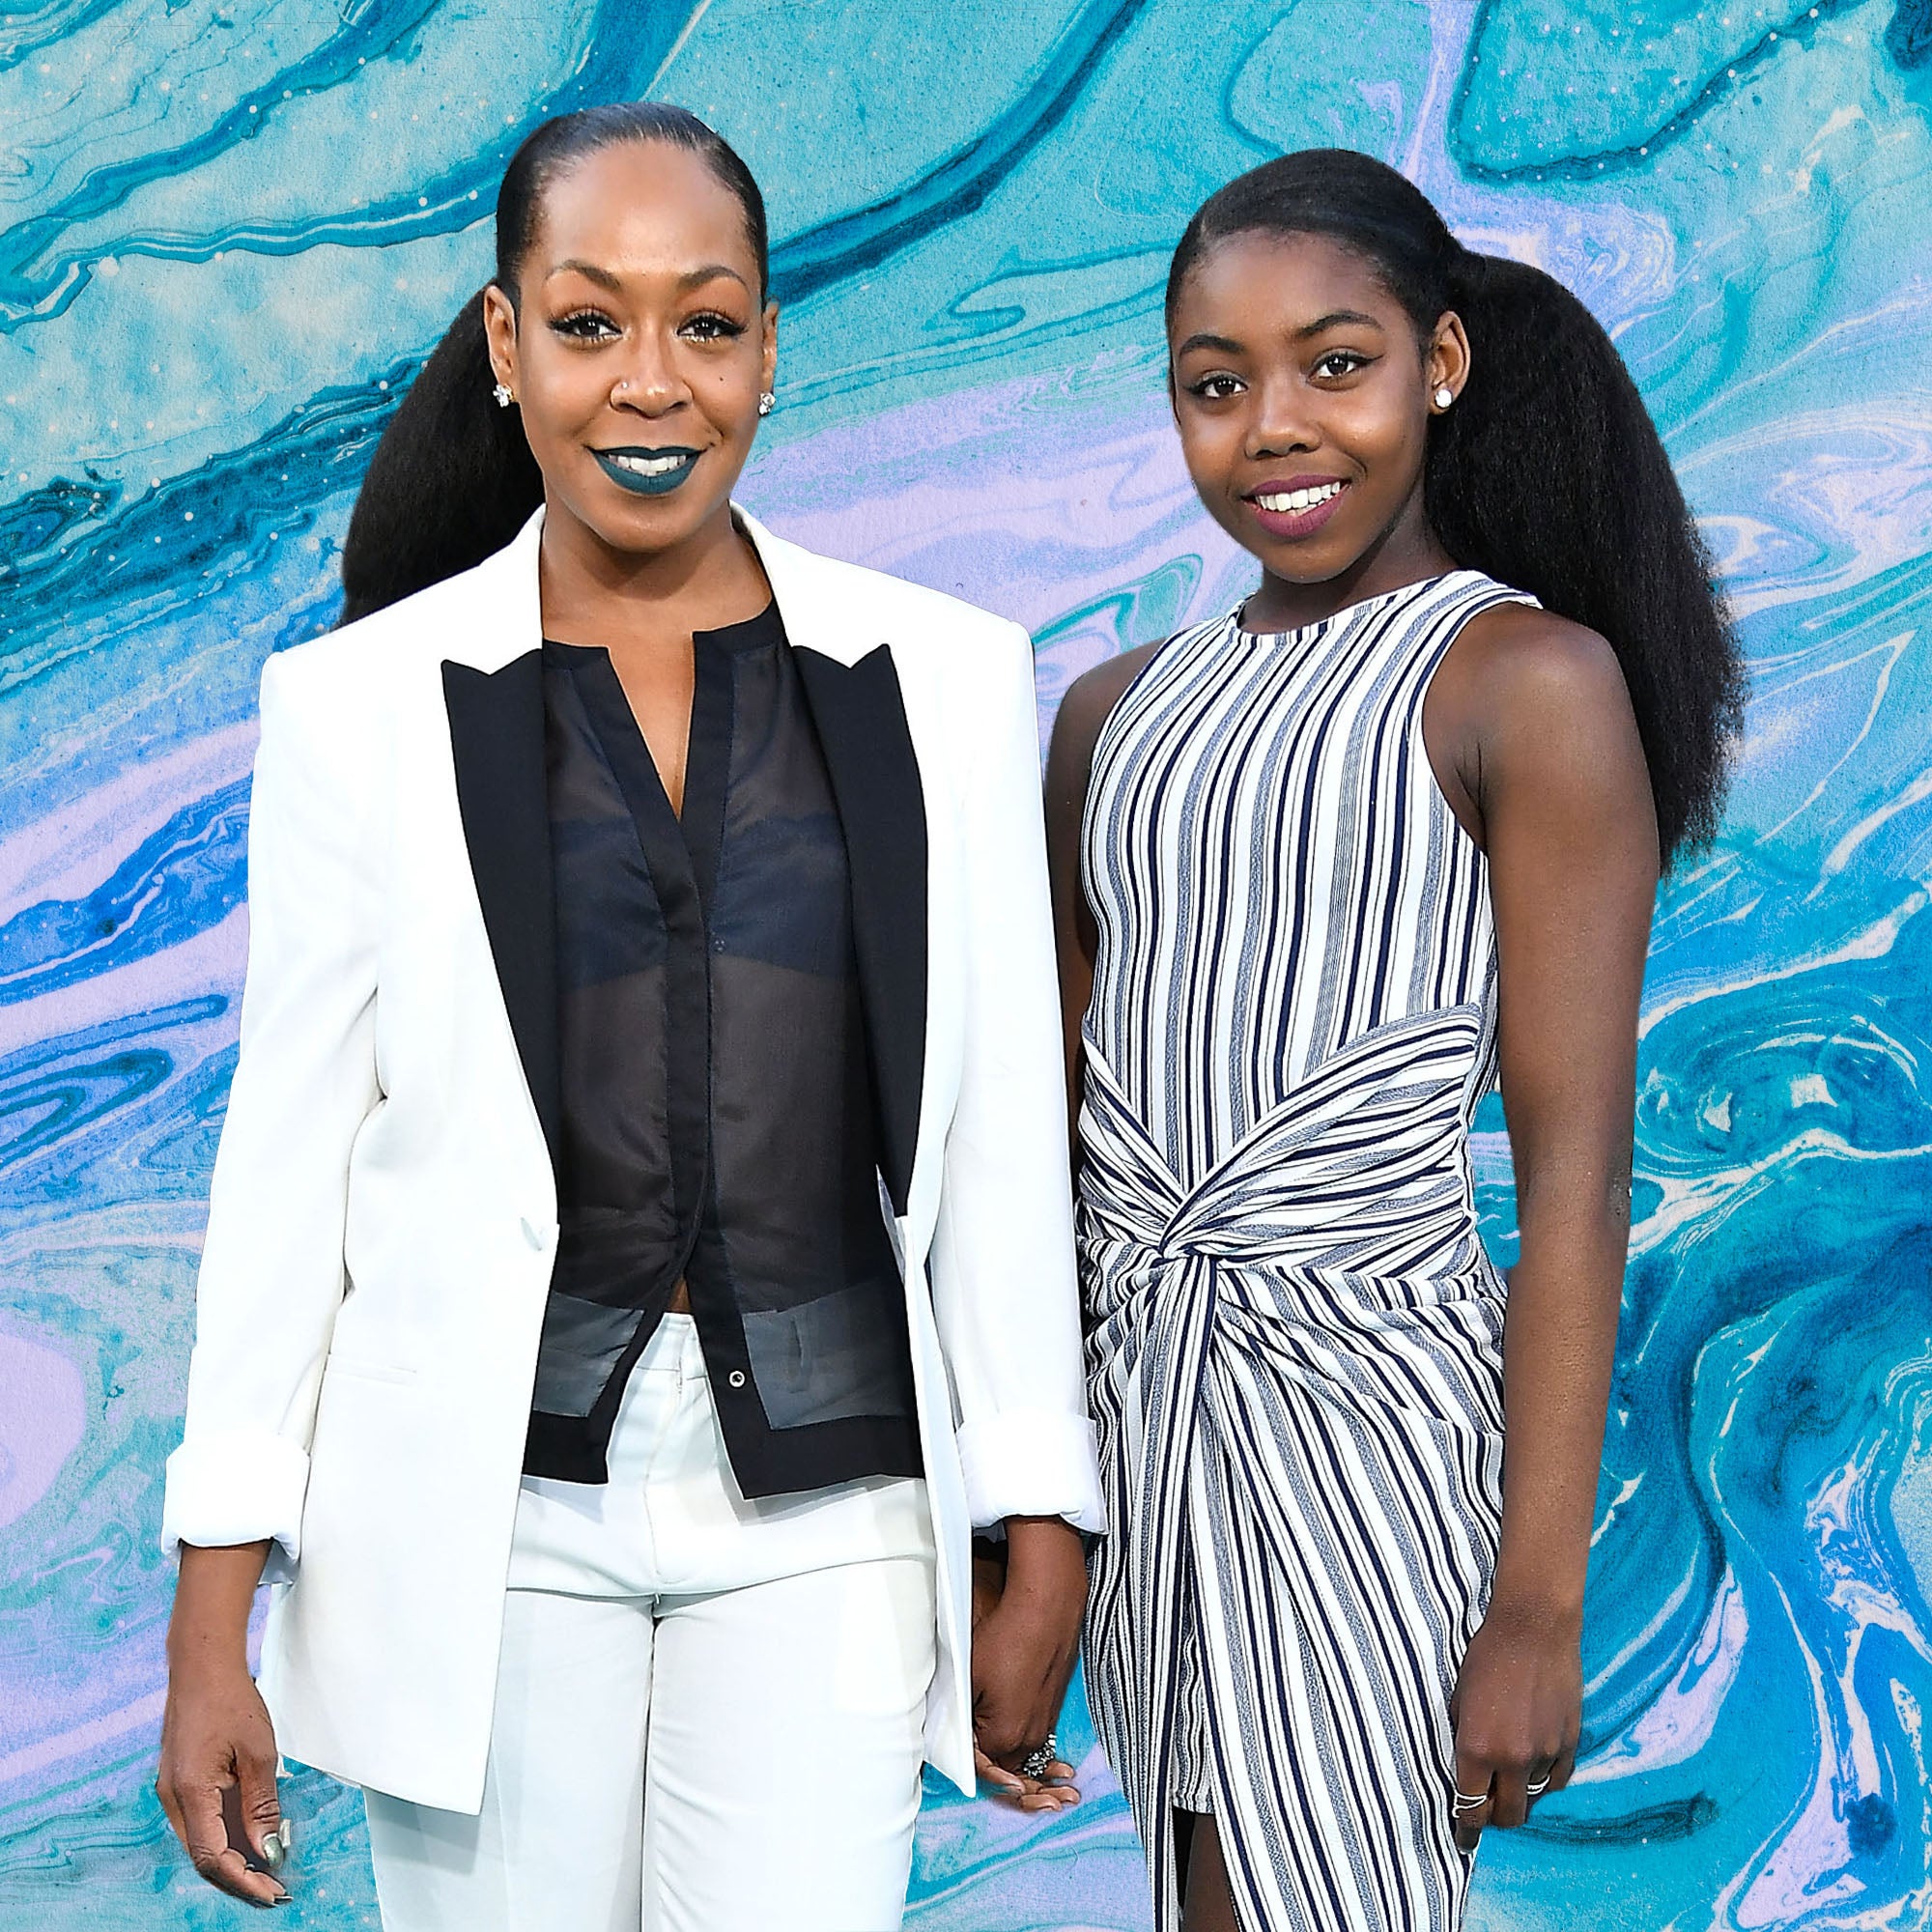 Mother-Daughter Cutenes: Tichina Arnold Sings Beyonce’s ‘Party’ With Daughter Alijah Kai
